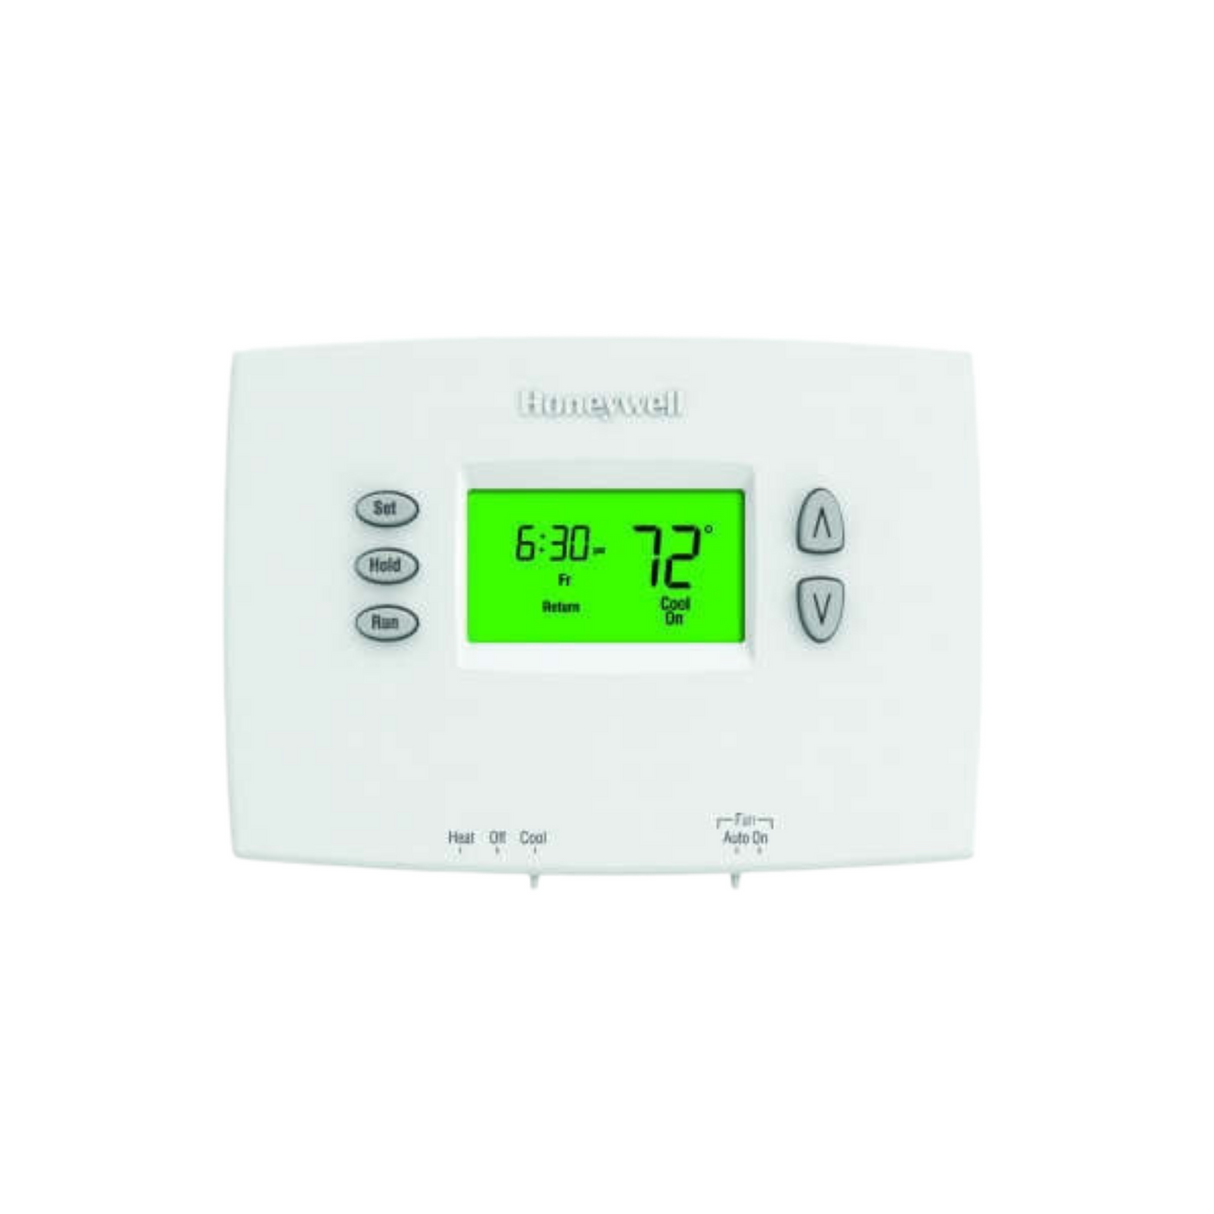 Honeywell TH2210DH1000 24V Pro 2000  Horizontal Programmable Thermo